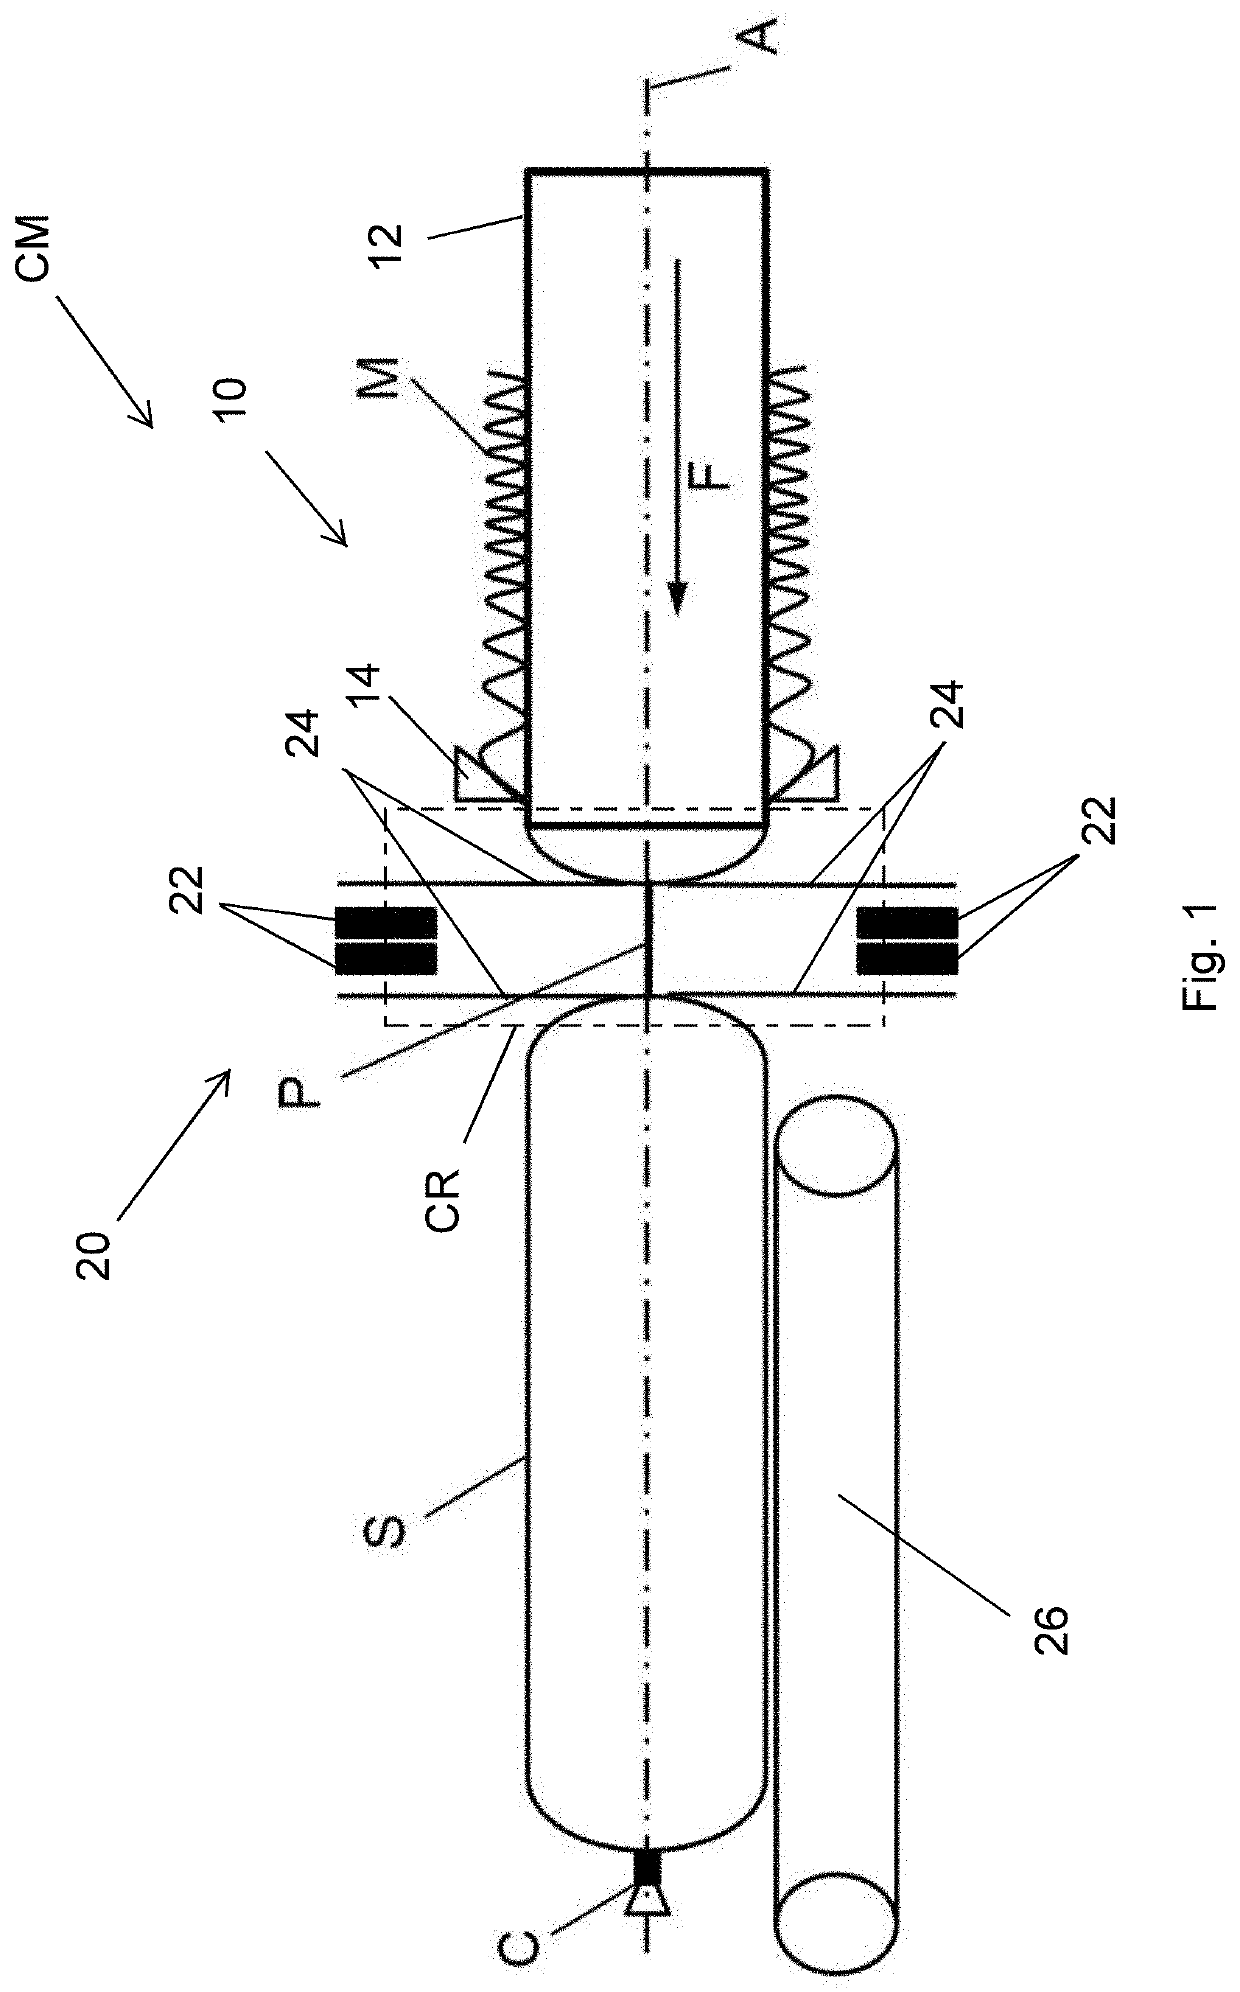 Clipping Machine with Secured Access to the Clipping Region